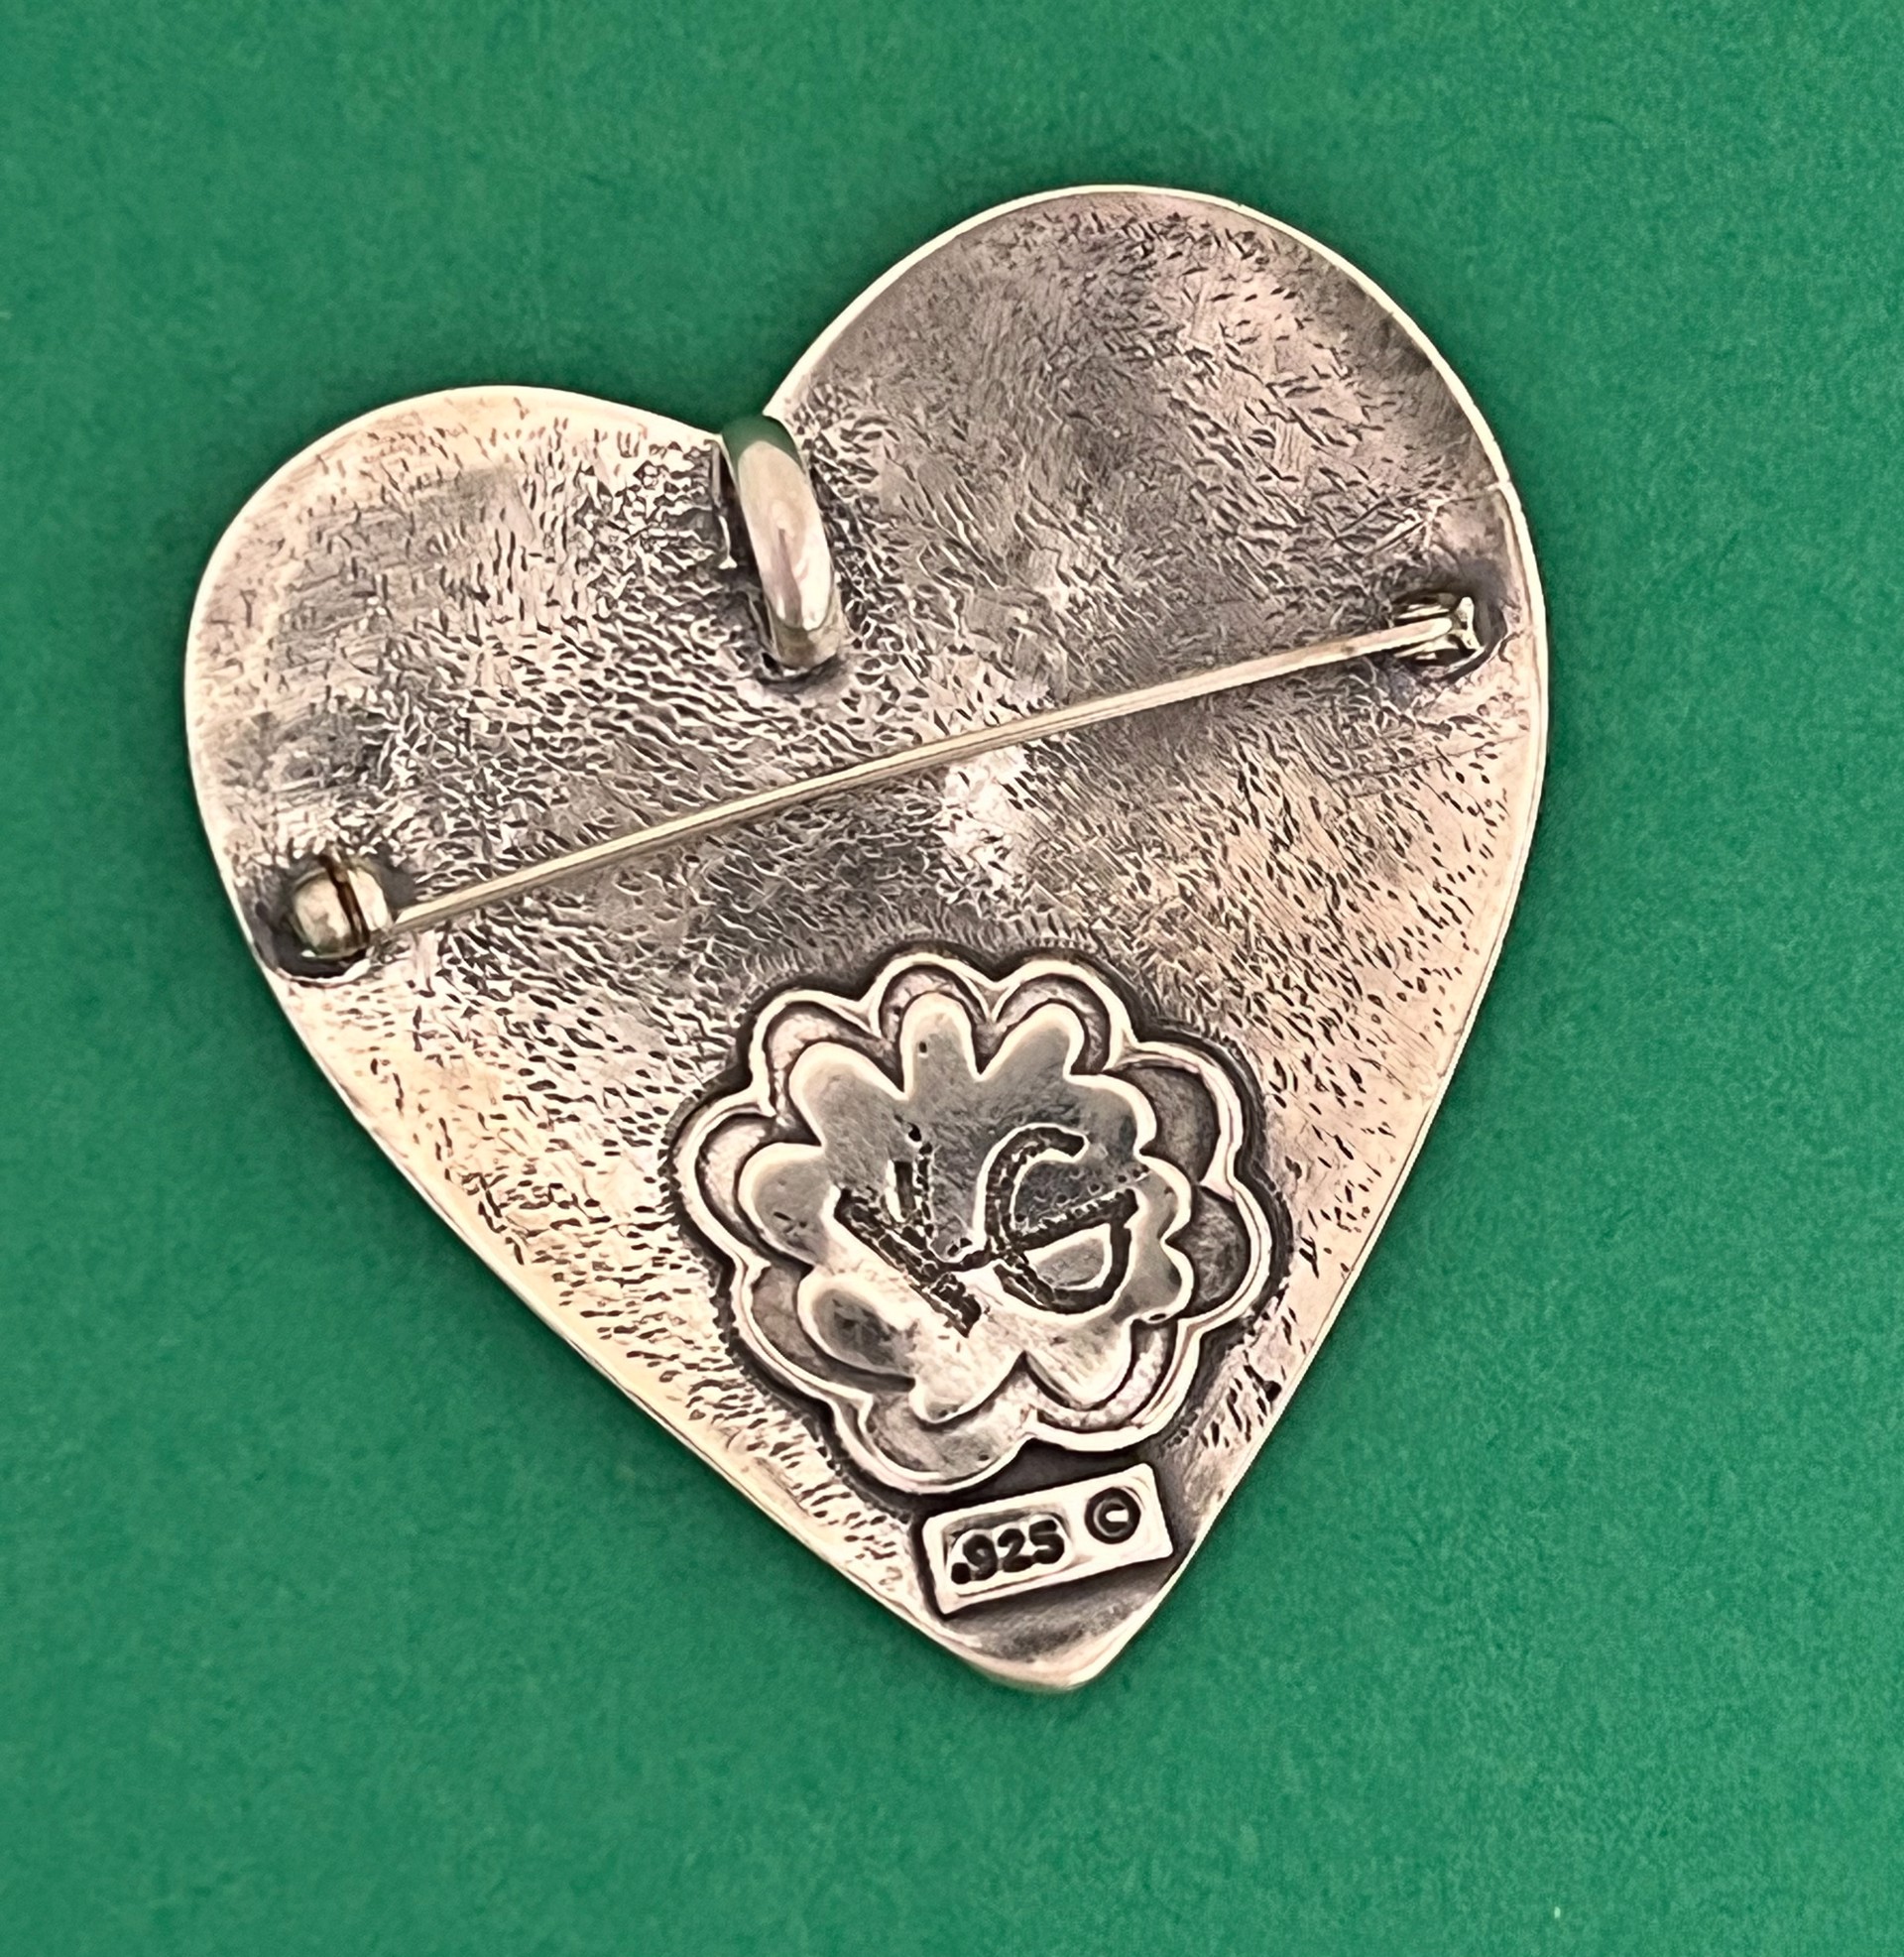 Mended (Heart pin/pendant) by Kerry Green